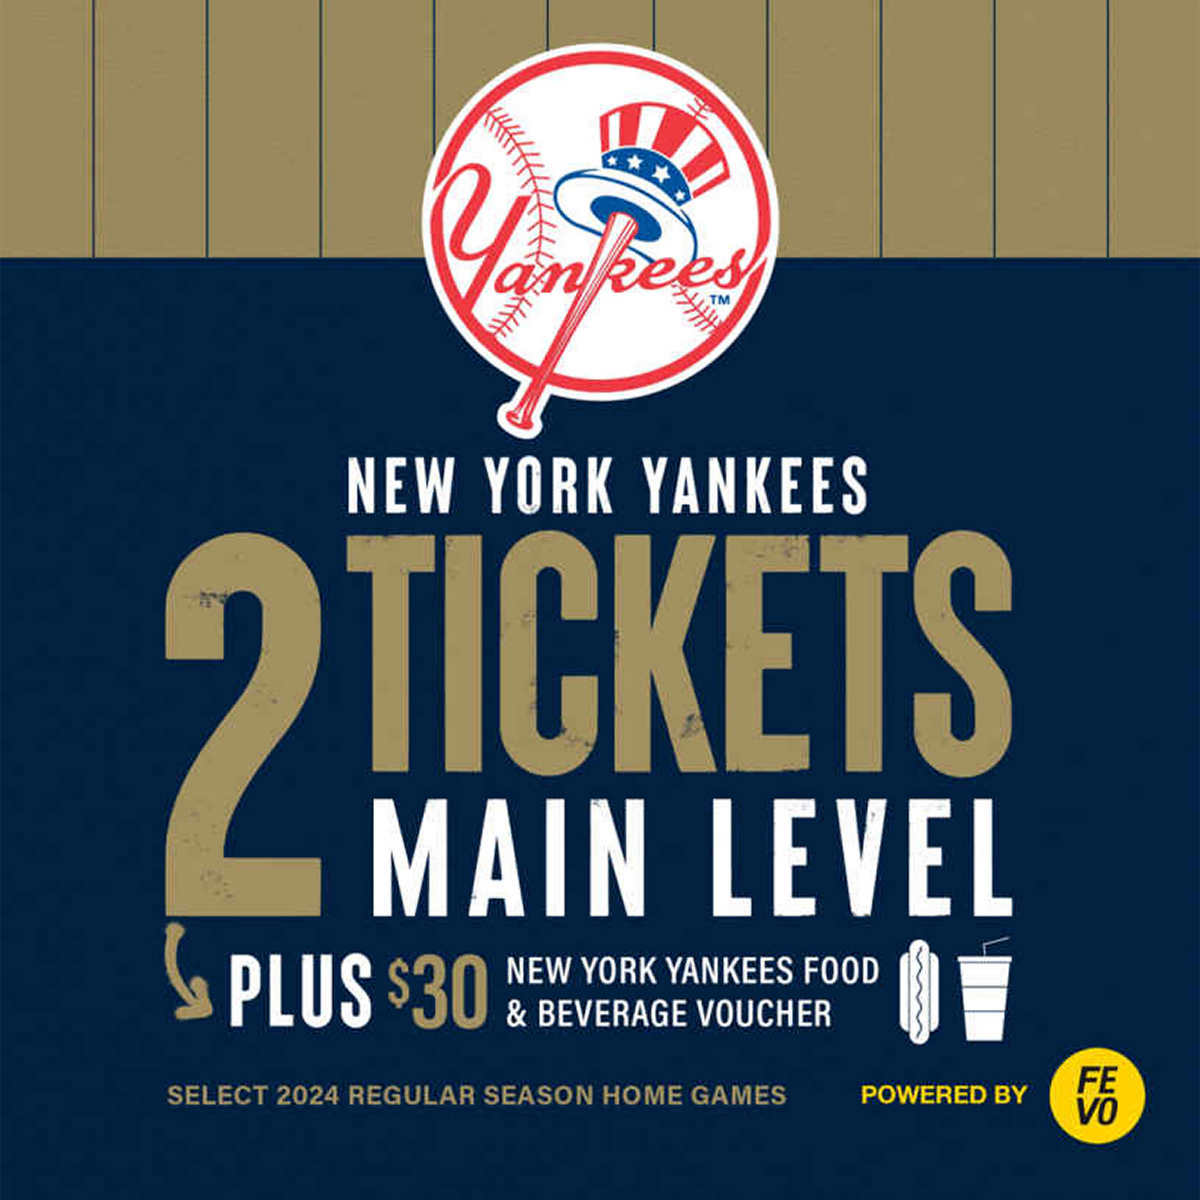 Select 2024 NY Yankee Games - 2 Main Level Tickets + $30 Food & Beverage Voucher [COSTCO] $99.99